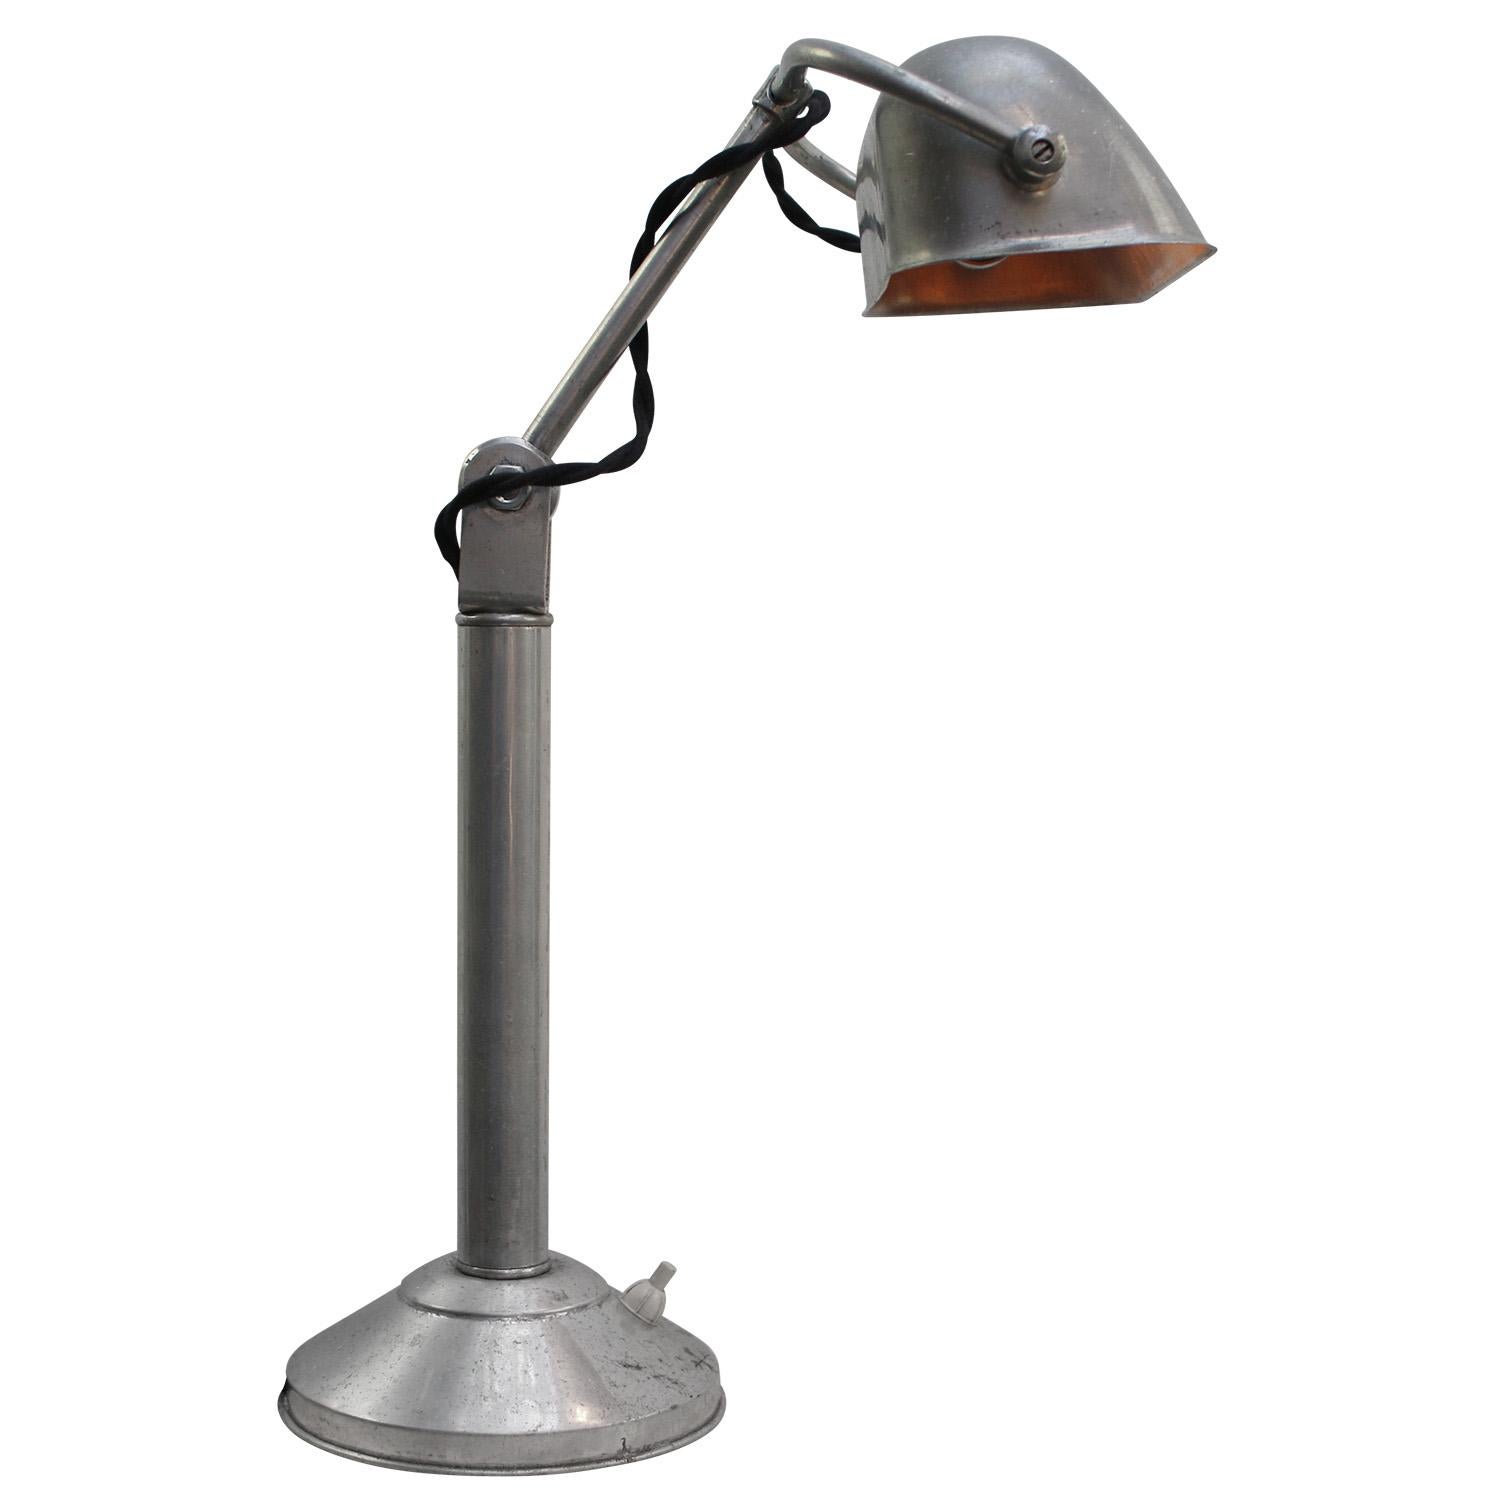 Silver aluminium desk light / banker’s lamp
2,5 meter black cotton flex, plug and switch in base

B15 bulb holder

Also available with US/UK plug

Weight: 2.10 kg / 4.6 lb

B15 bulb holder. Priced per individual item. All lamps have been made